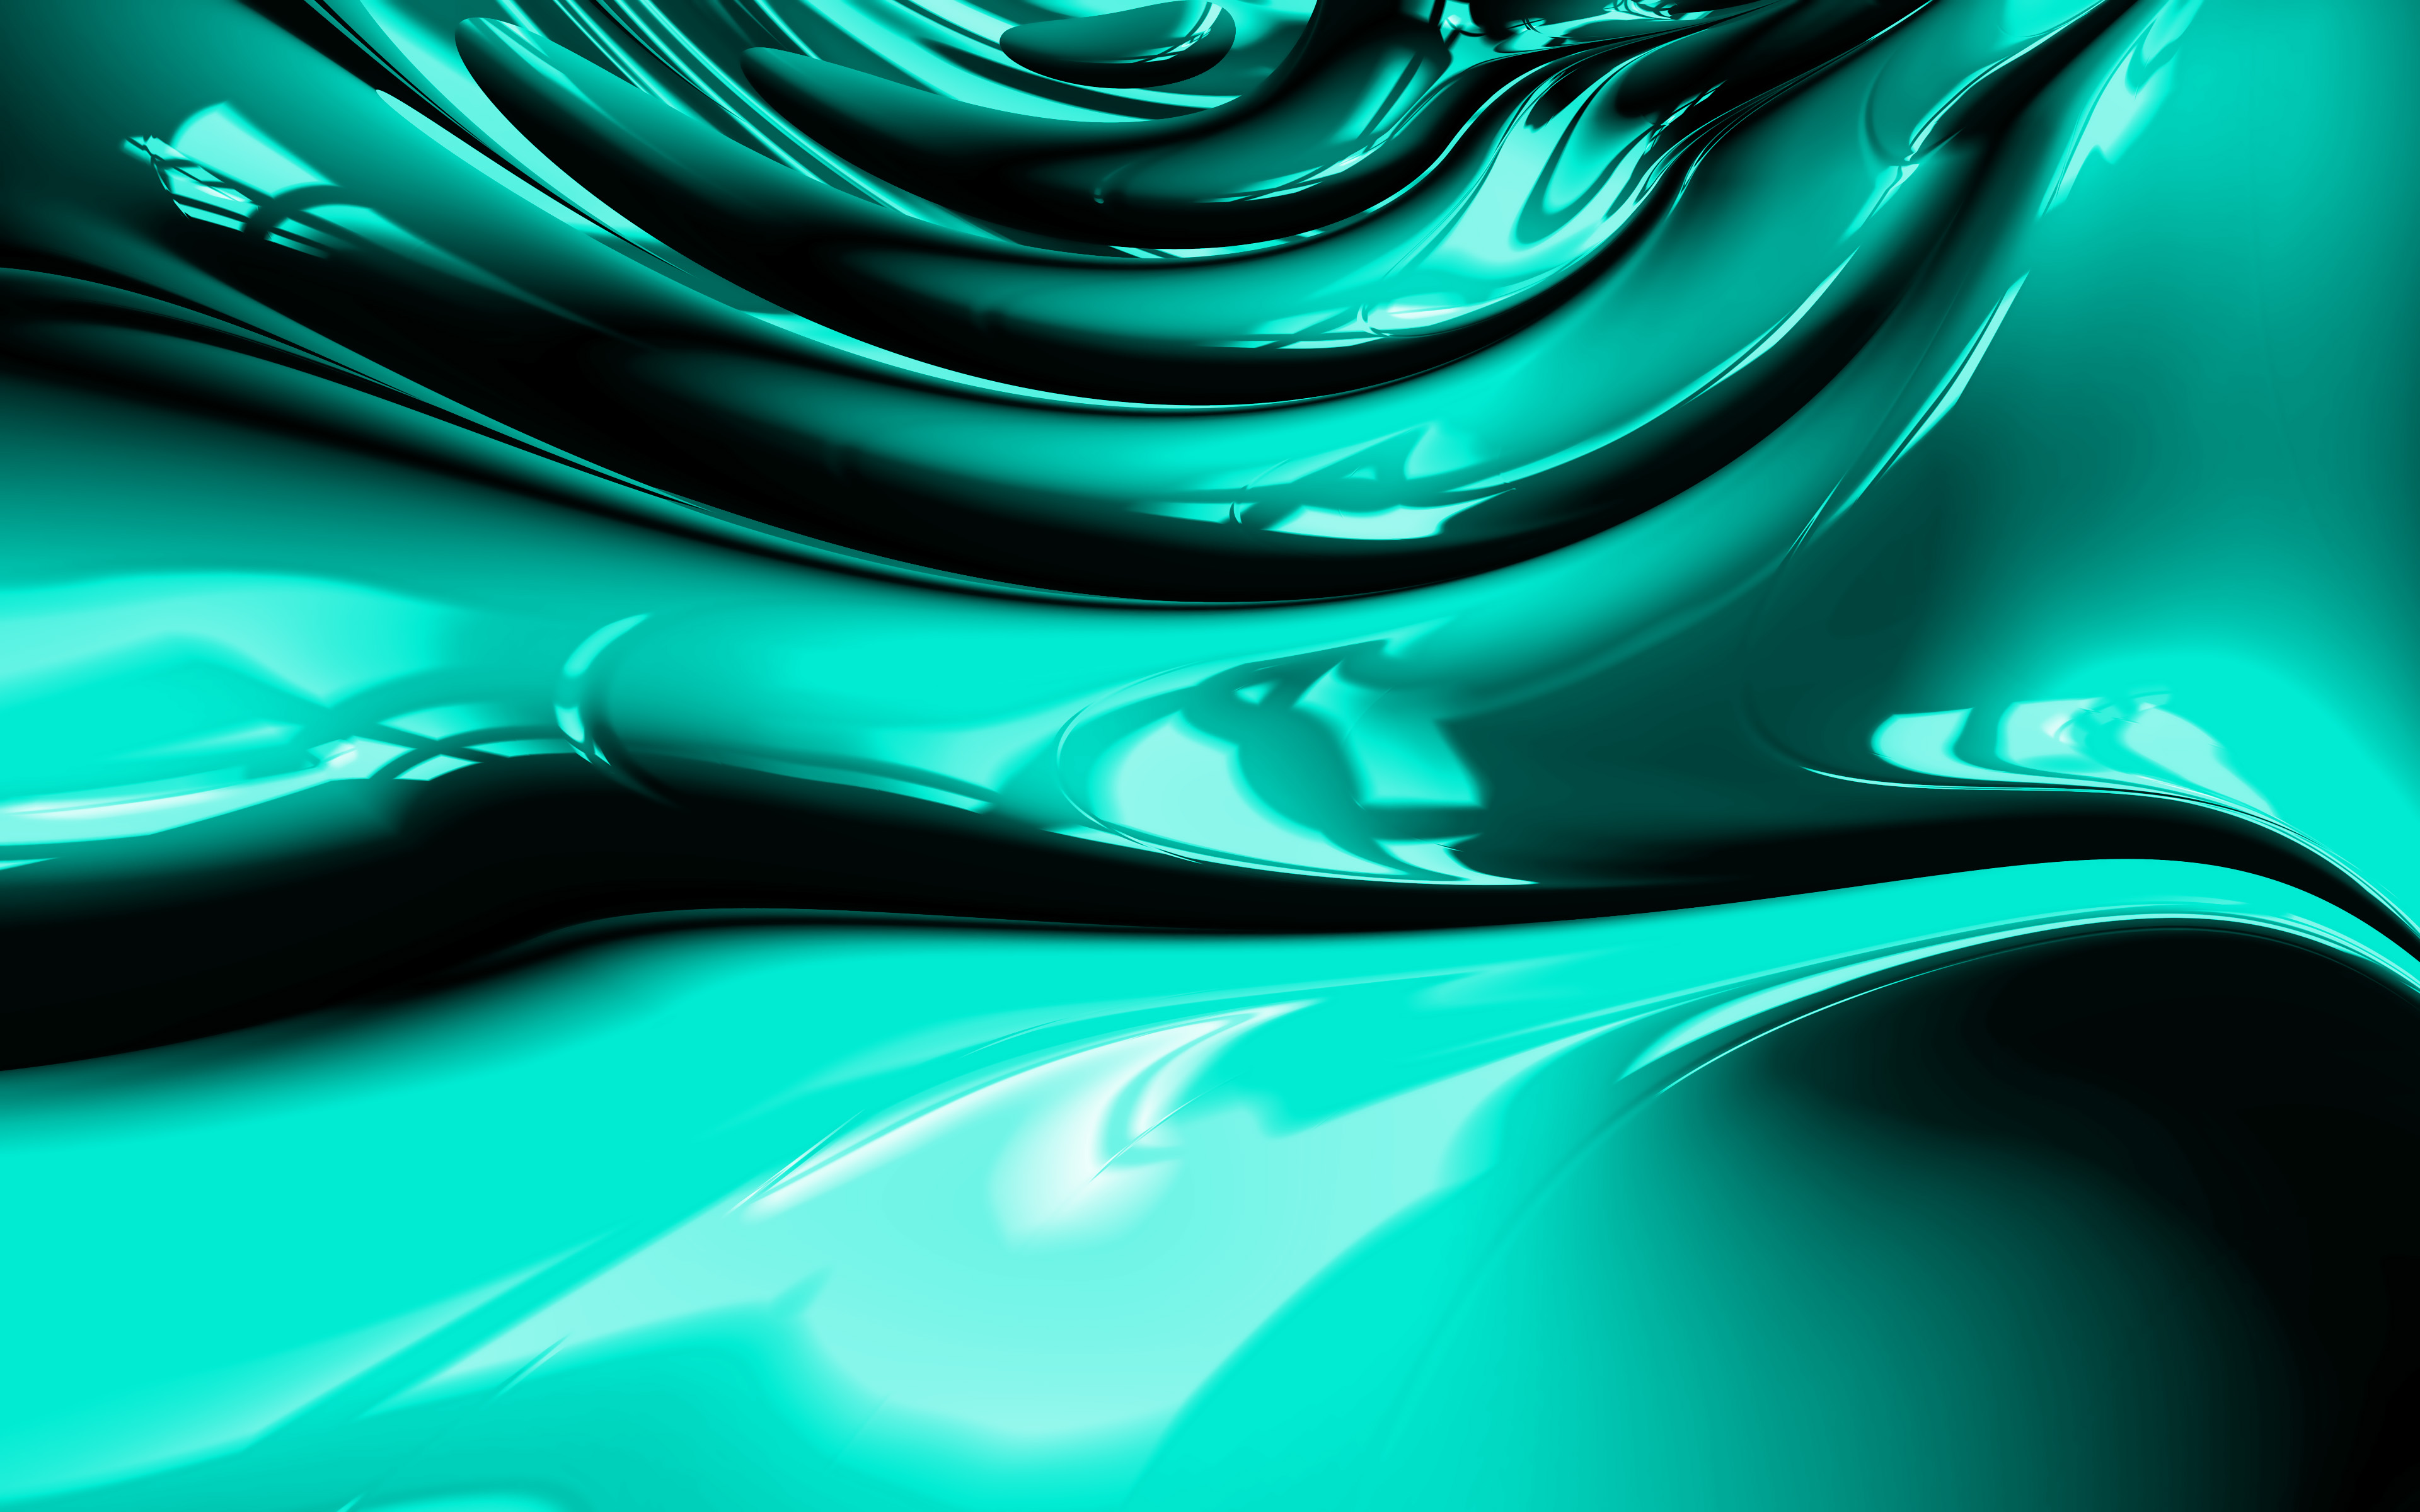 Download wallpapers 4k, turquoise abstract waves, 3D art, abstract art, turquoise wavy